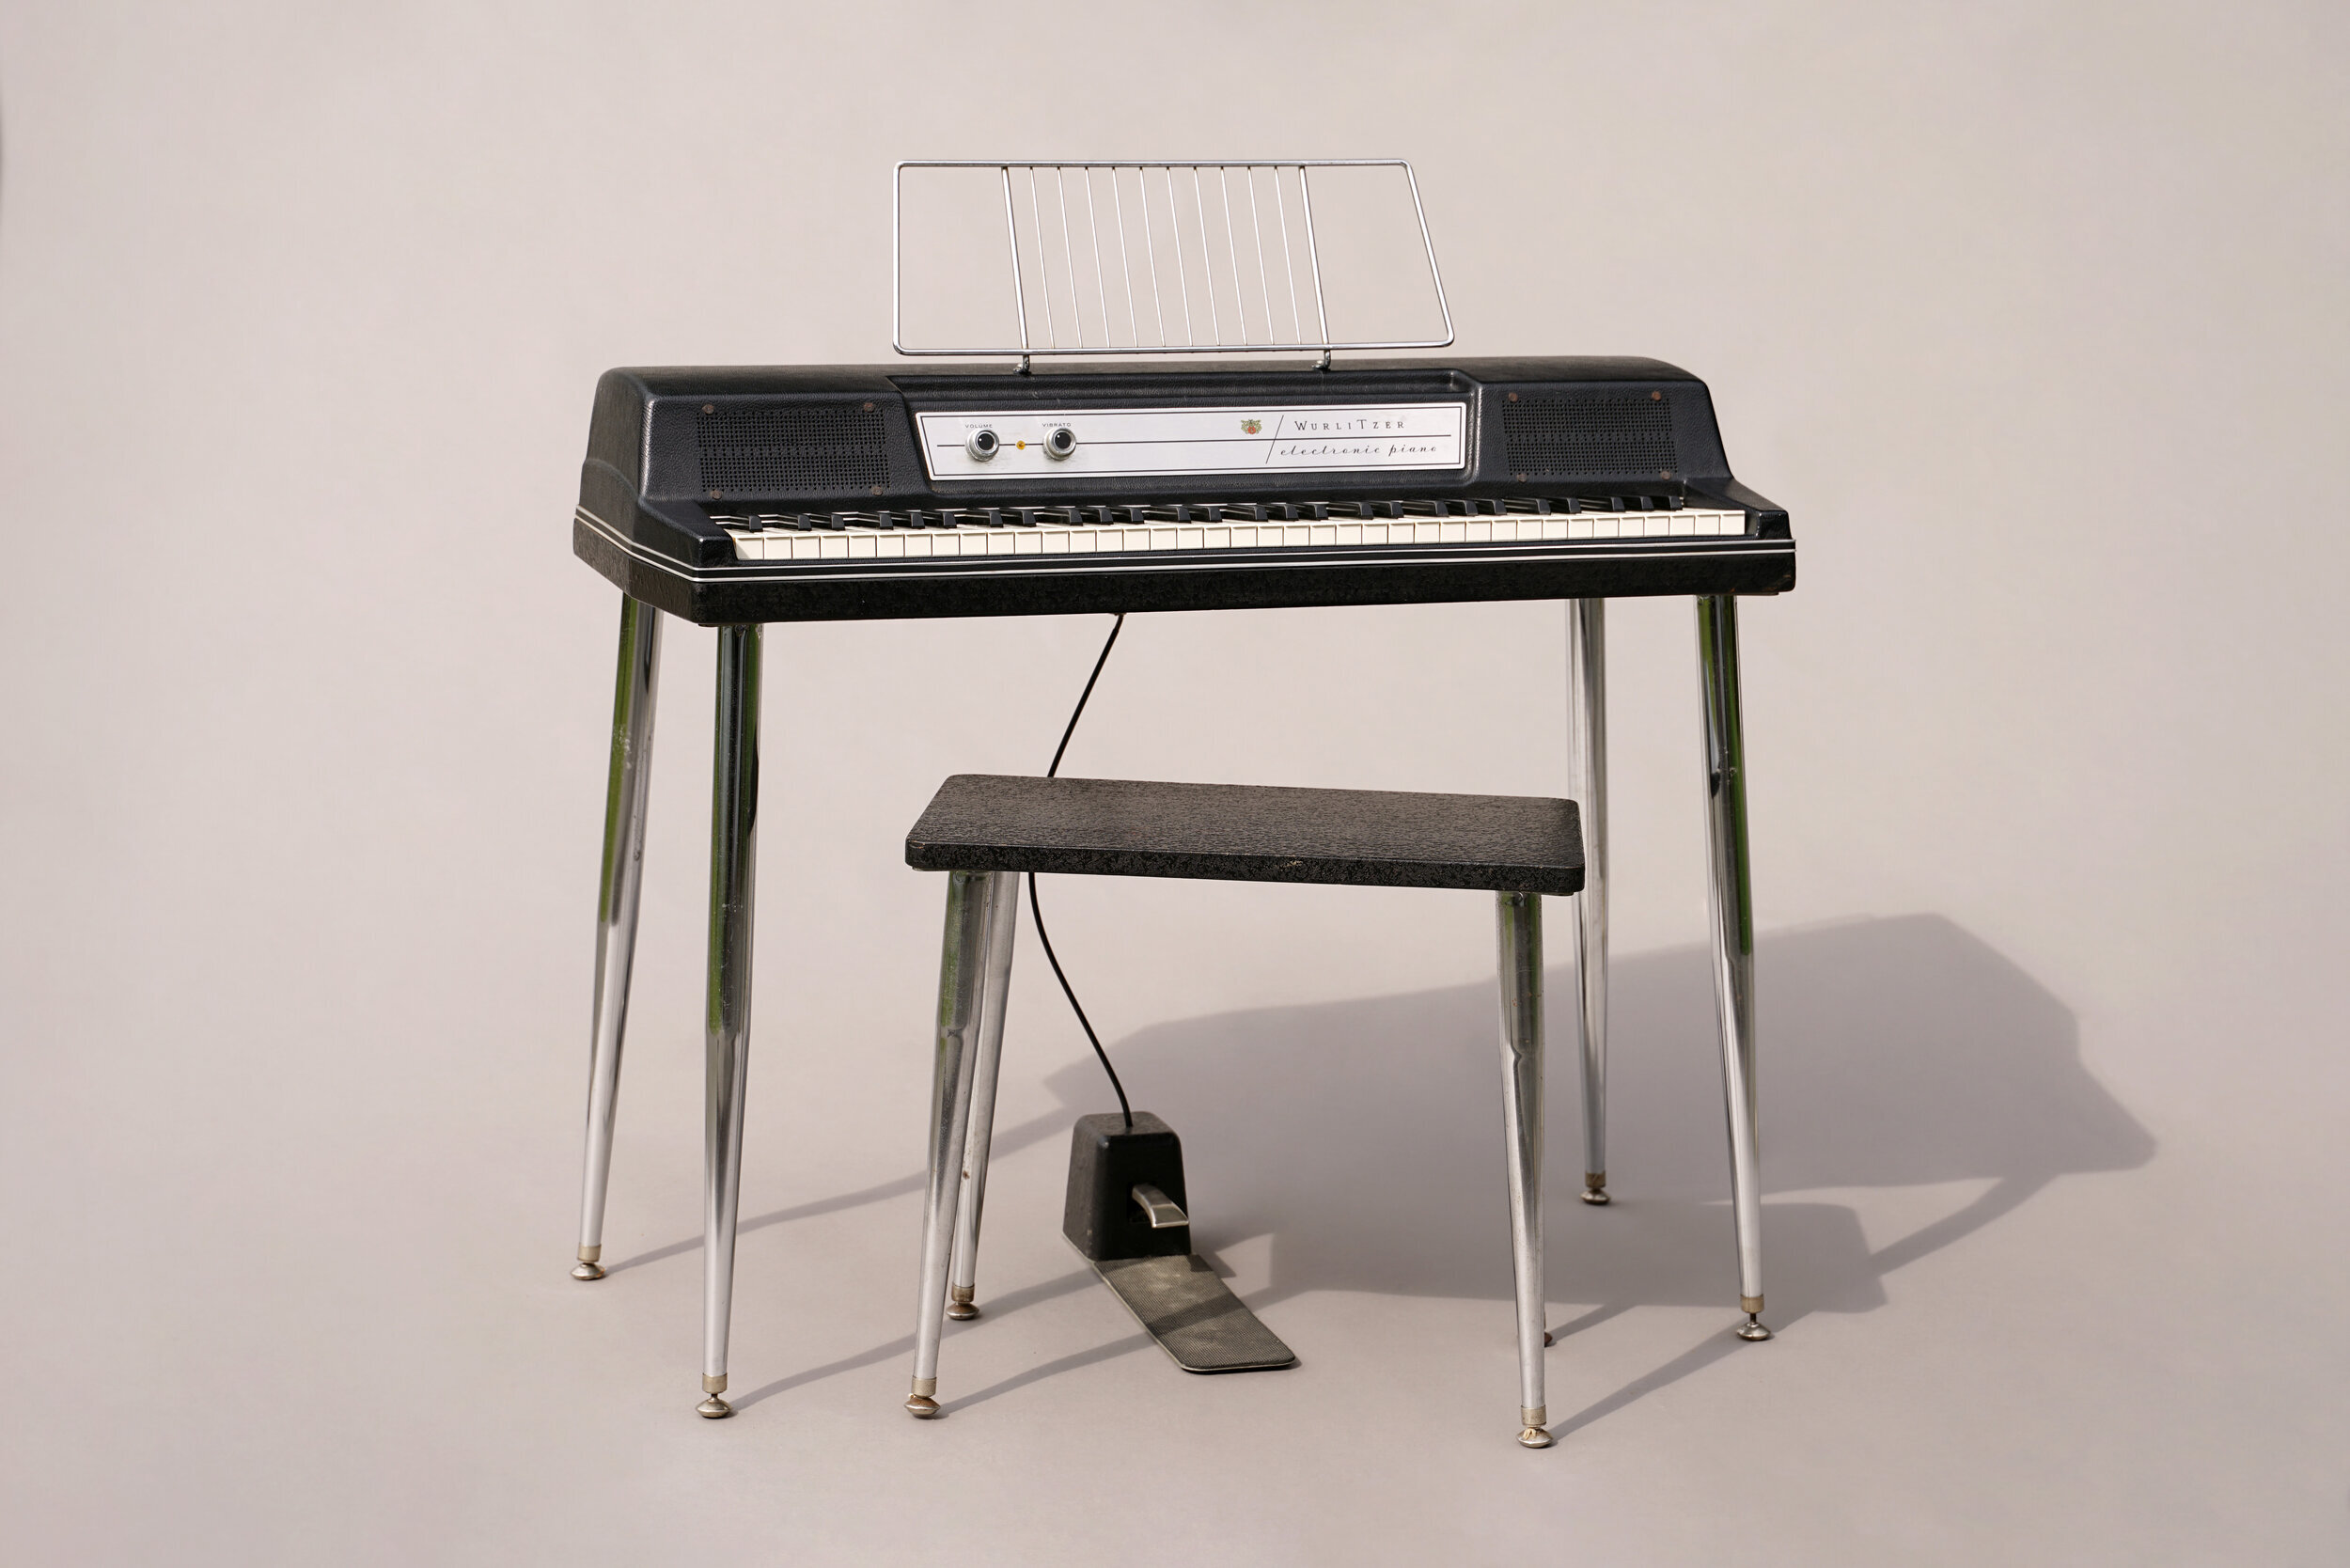 What should come with a Wurlitzer 200 or 200A Electronic Piano